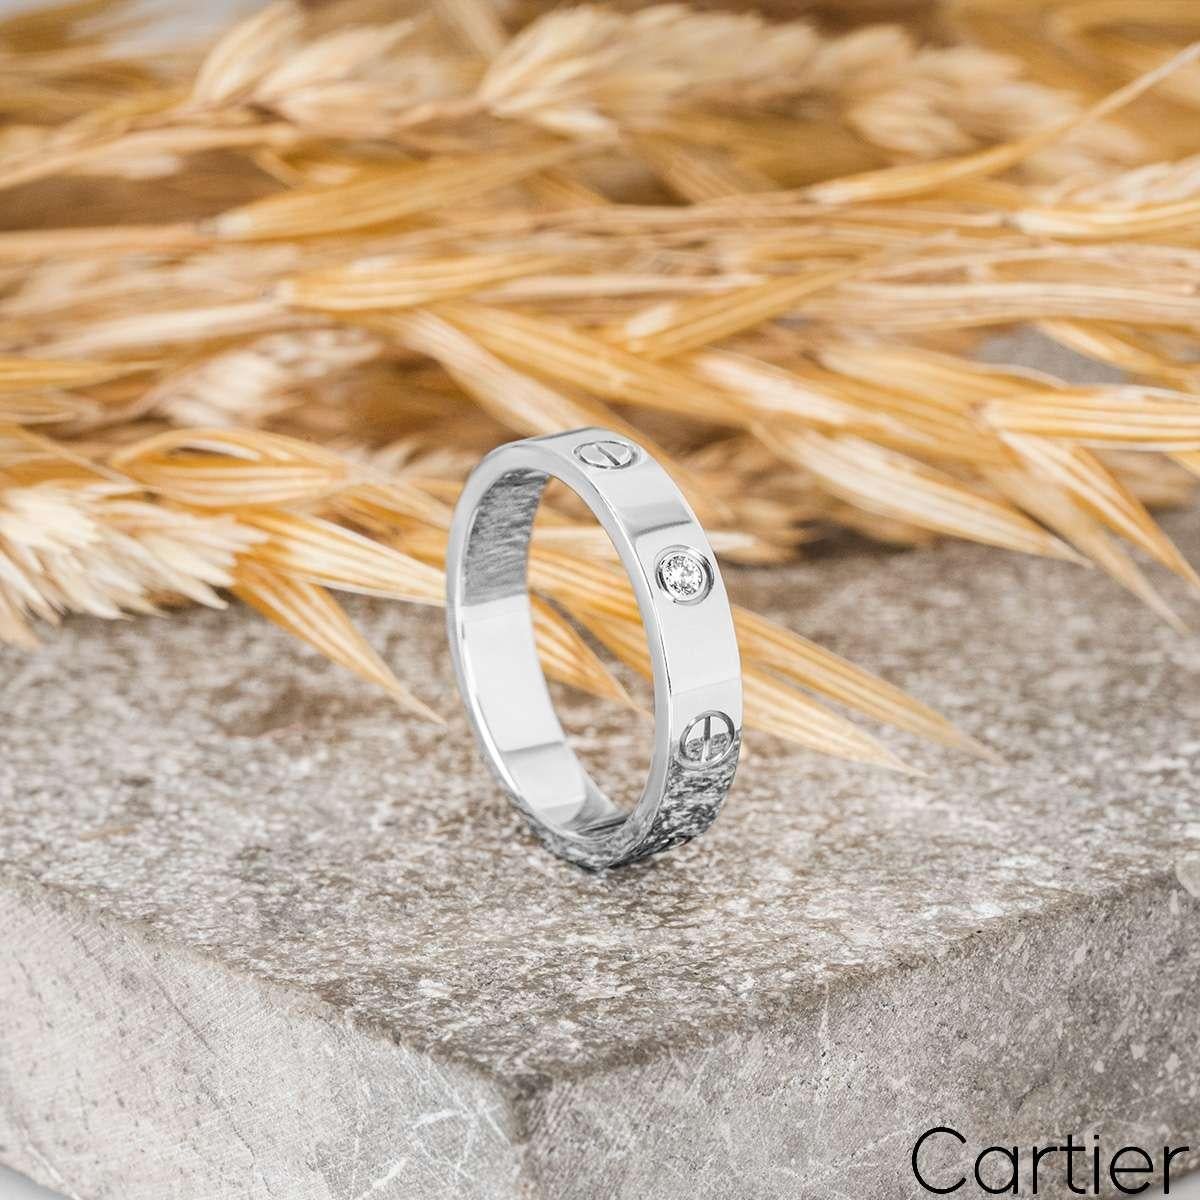 Cartier White Gold Diamond Love Wedding Band Size 53 B4050500 For Sale 3